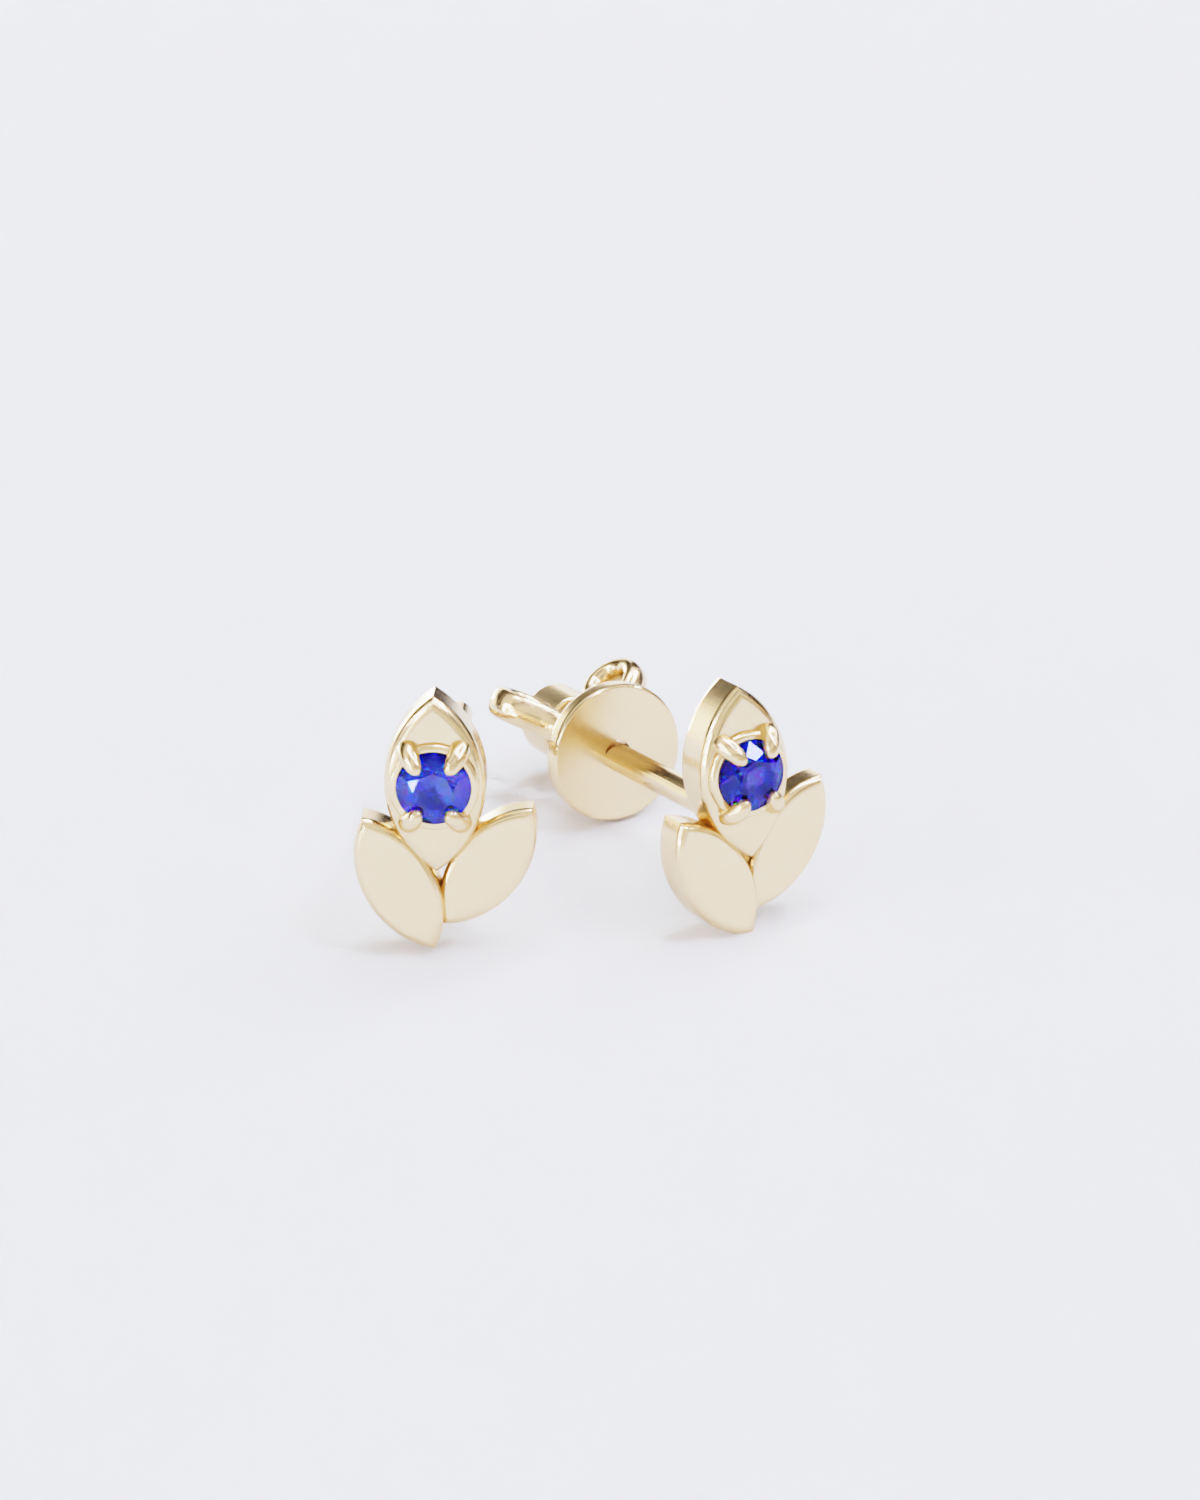 Spikelets gold piercing studs with sapphires